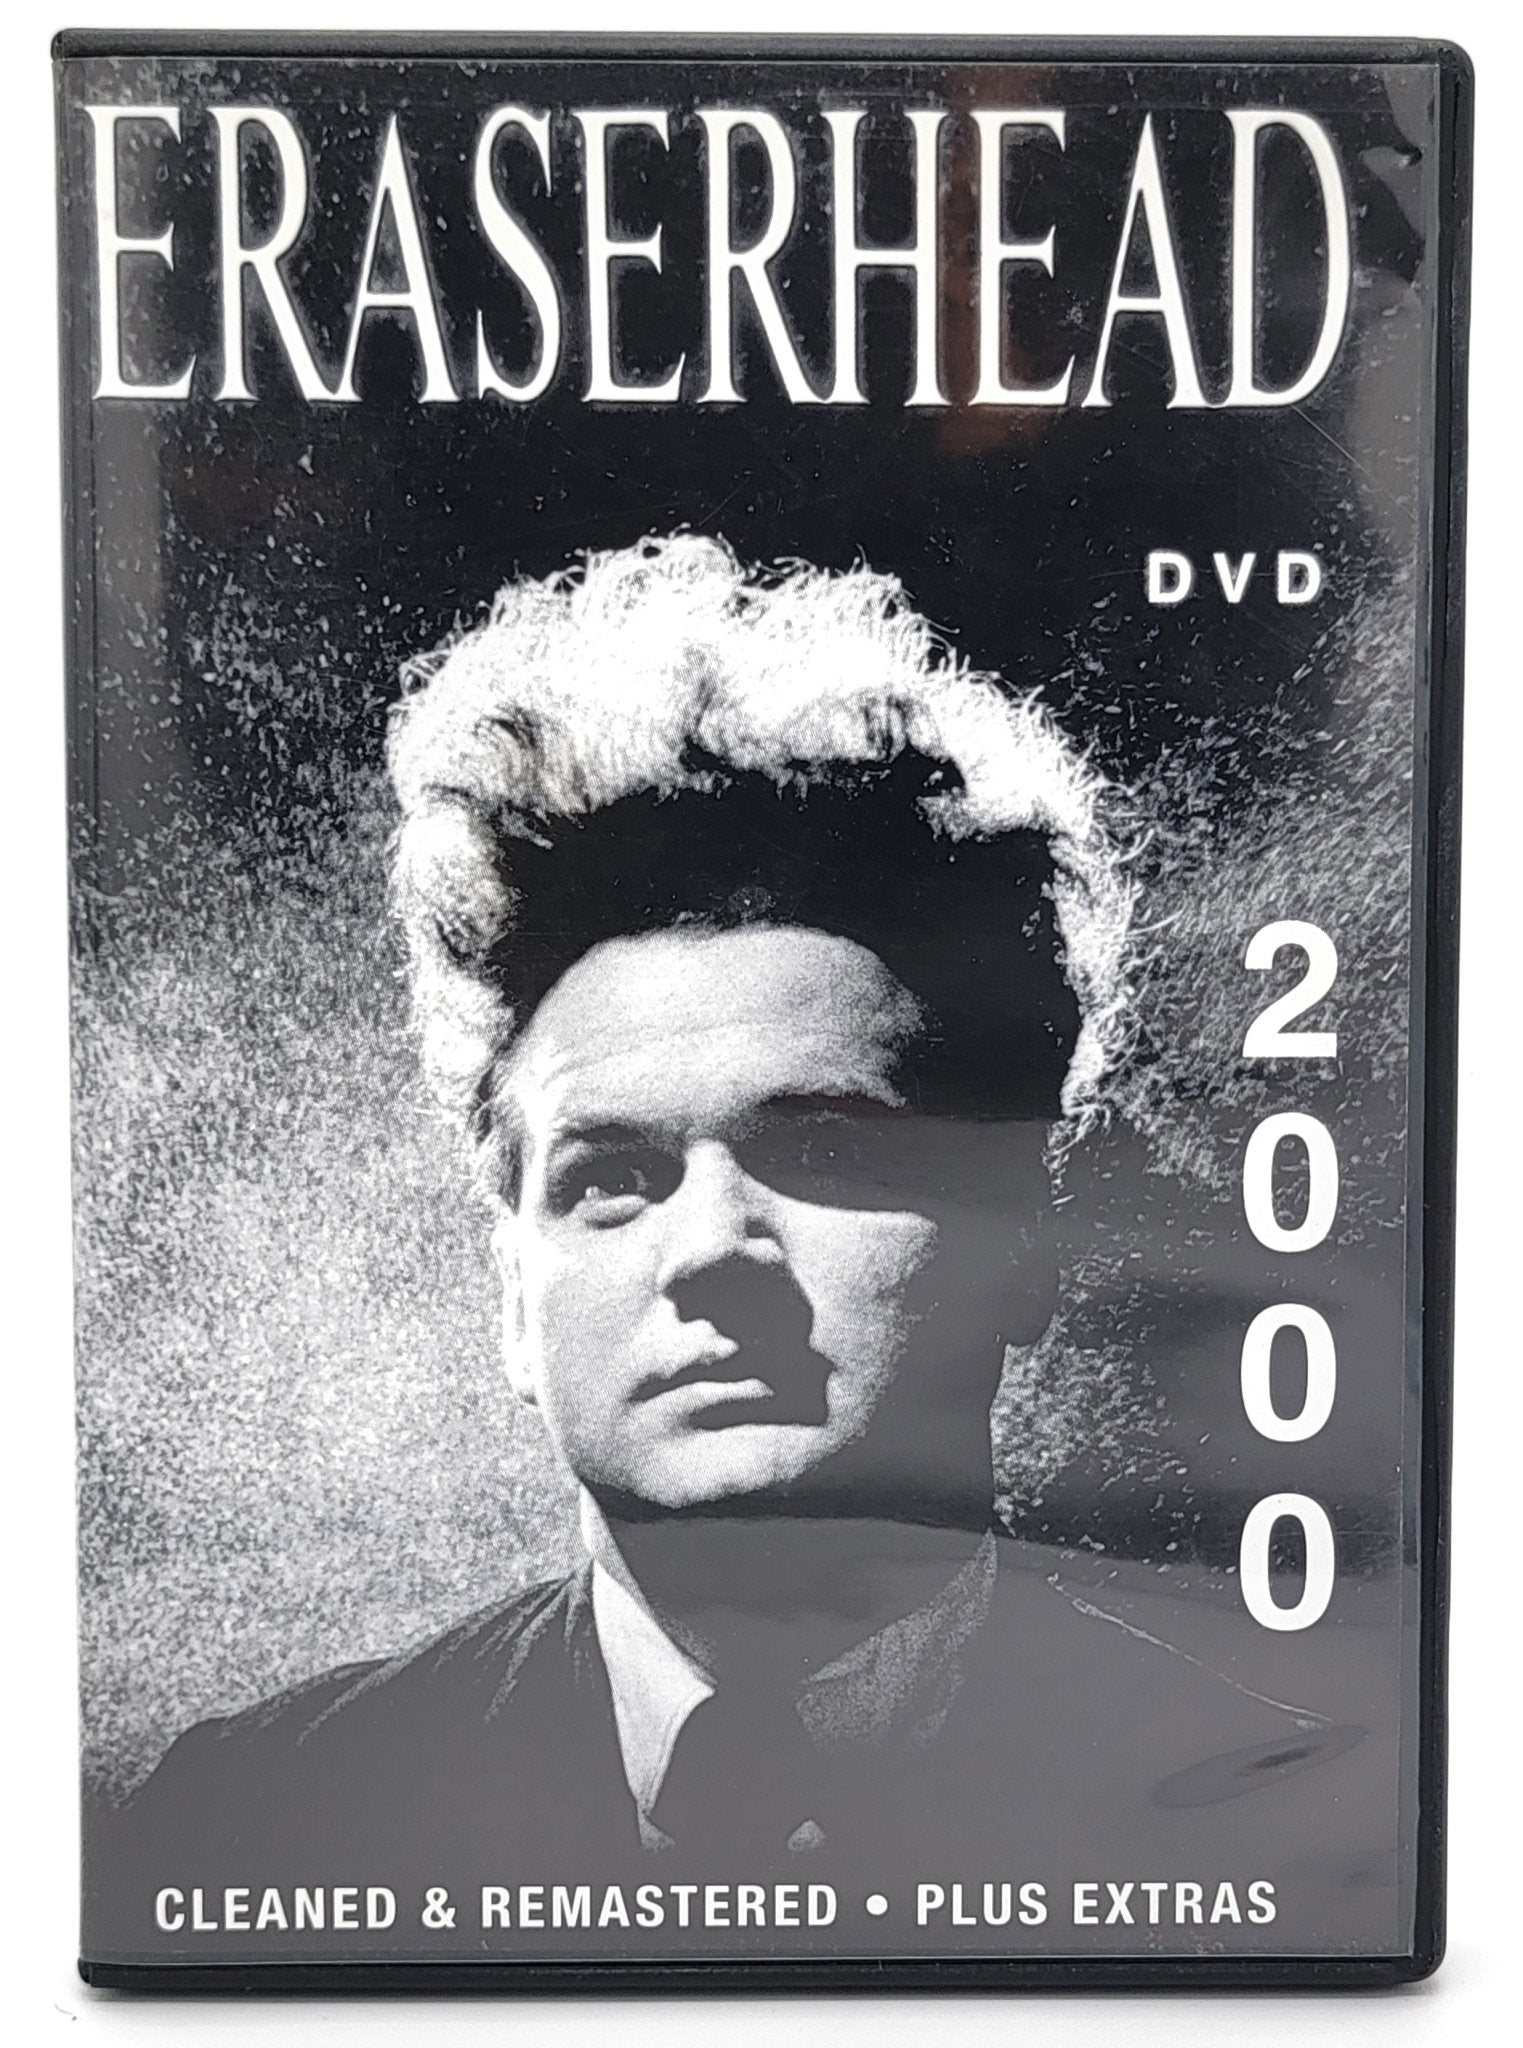 Criterion Collection - Eraserhead - DVD 2000 | DVD | Cleaned & Remastered - Plus Extras - DVD - Steady Bunny Shop